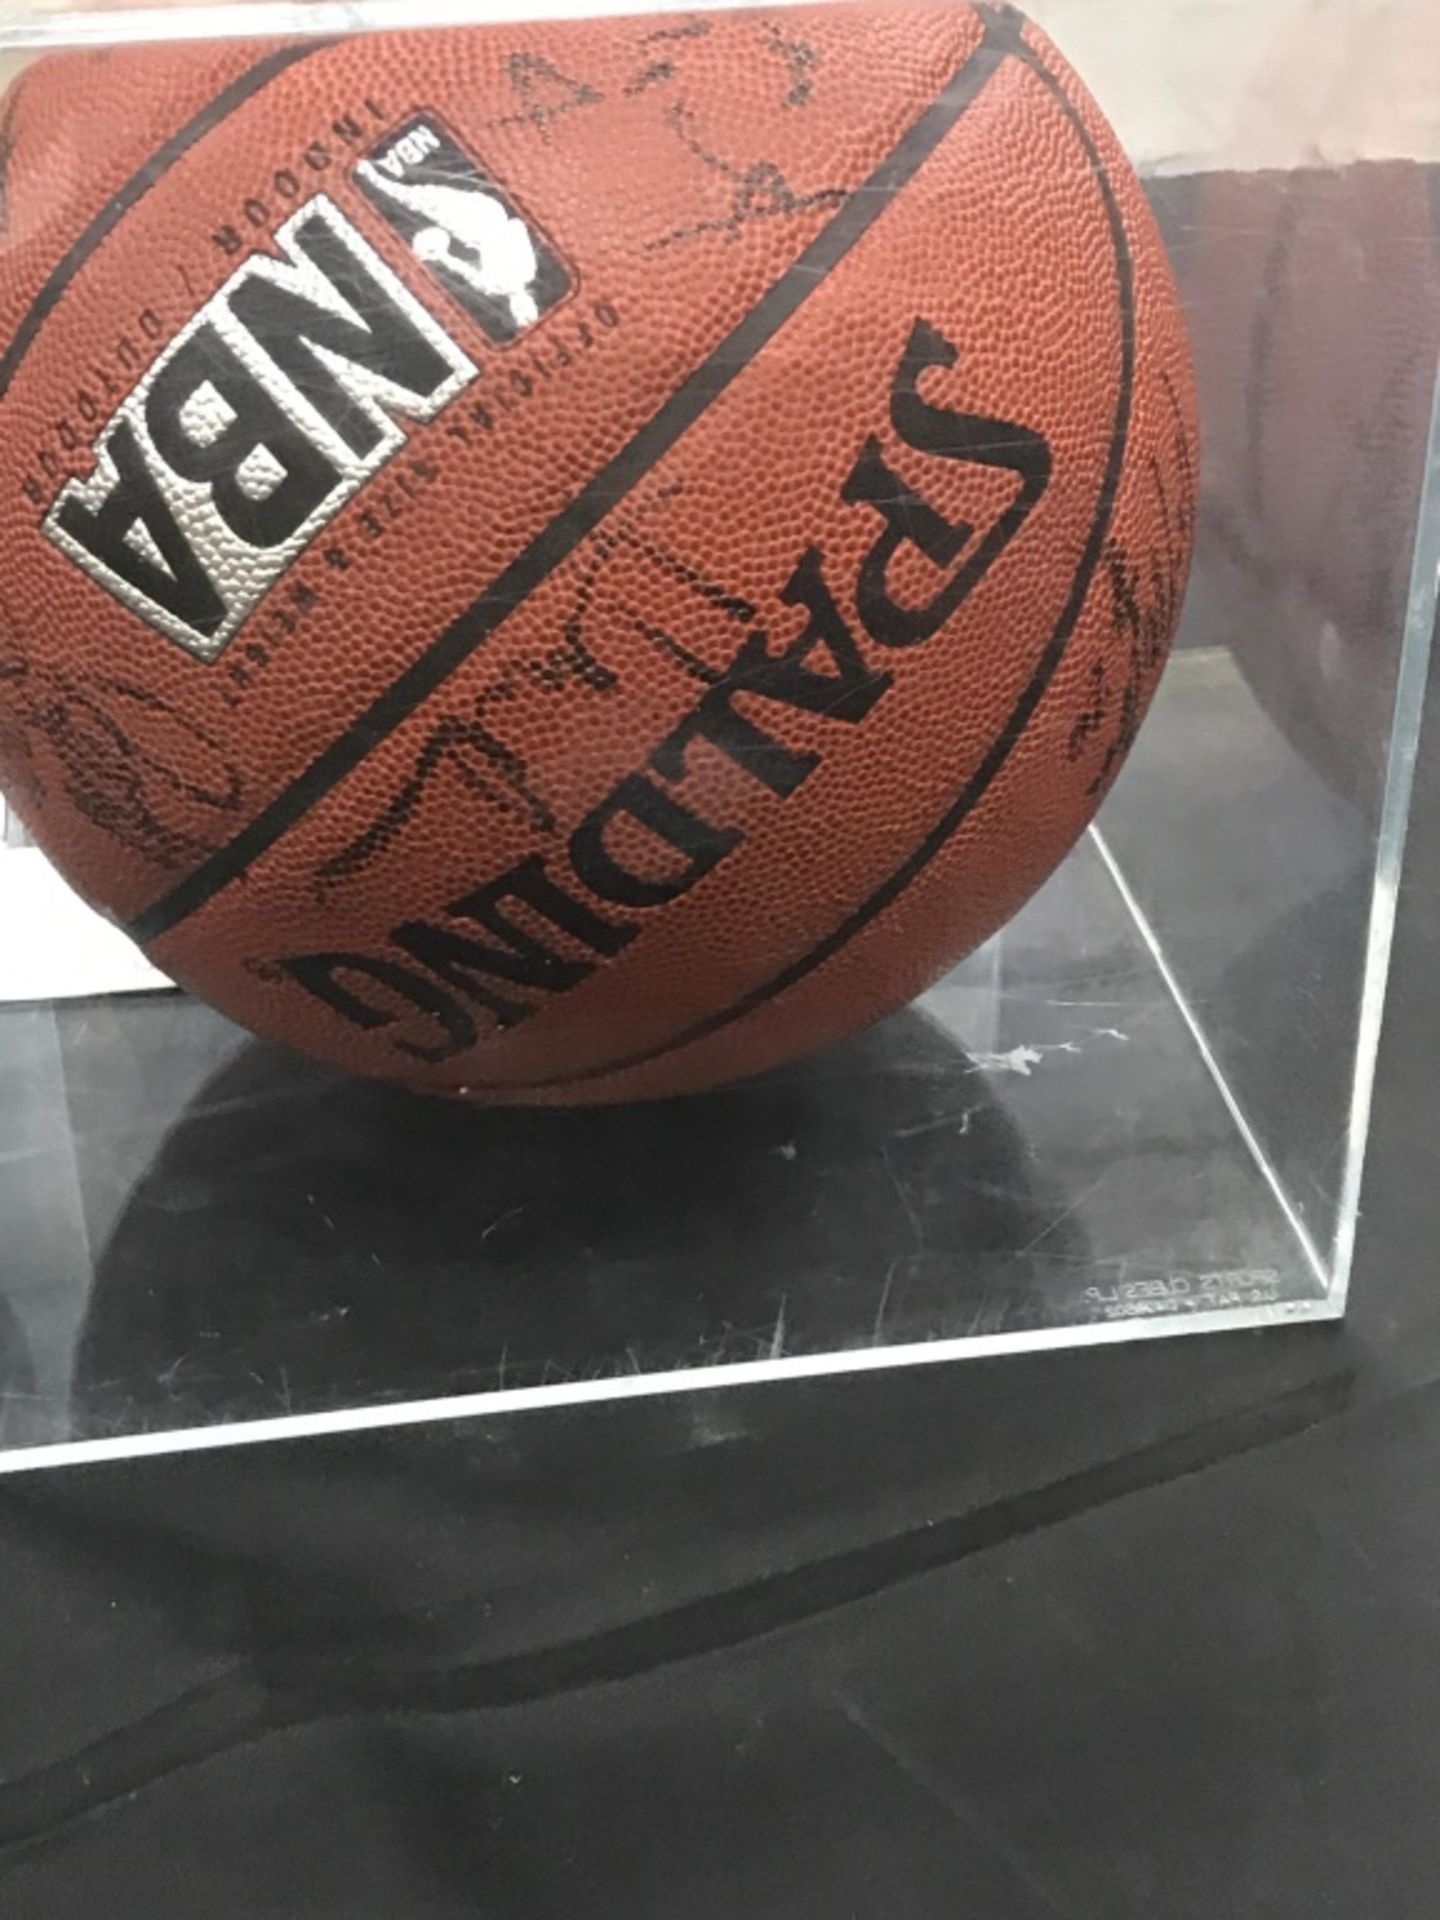 Basketball Signed by Rockets Team - Image 10 of 10